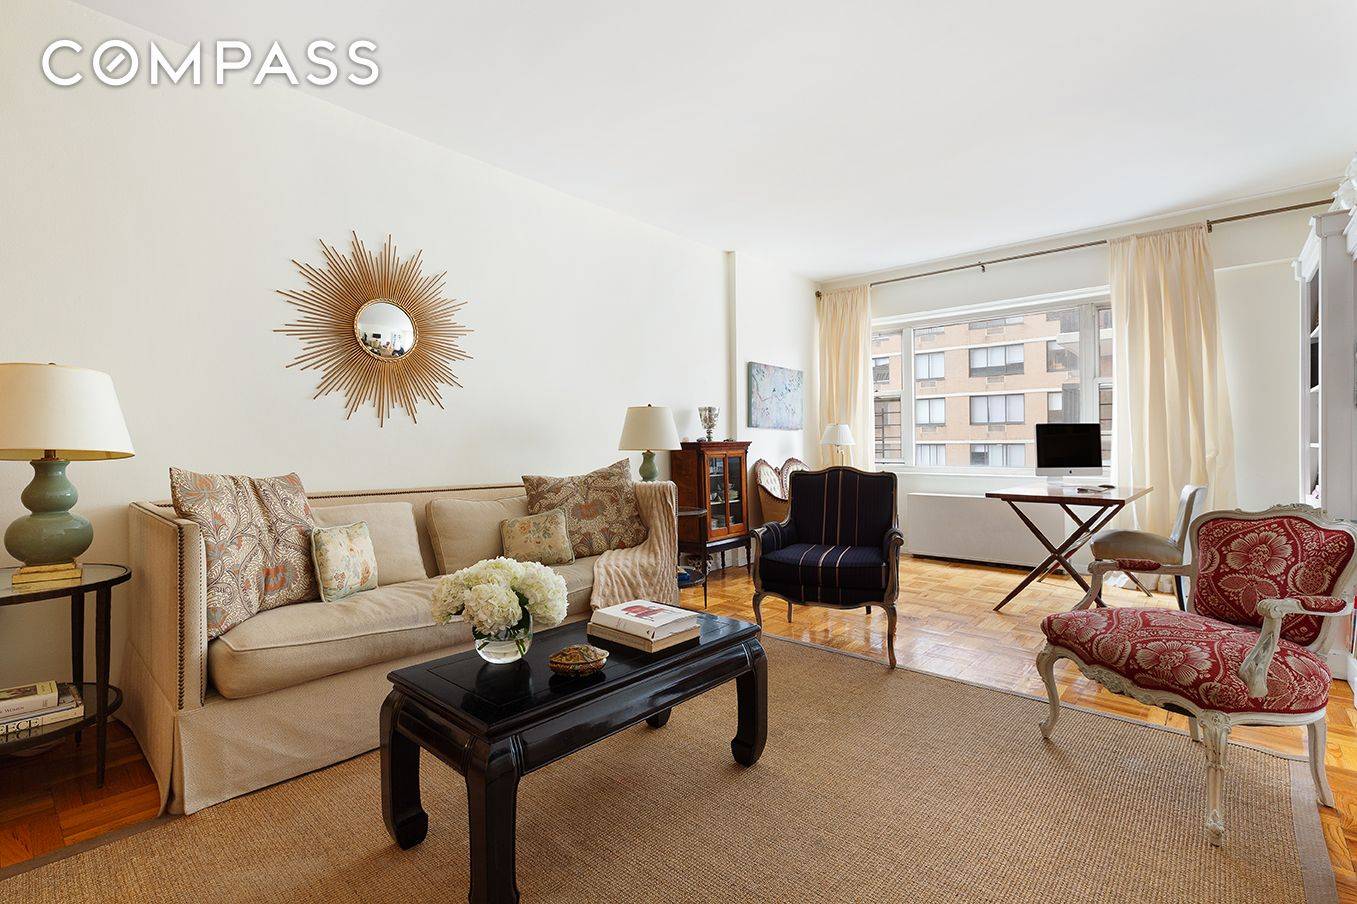 Quiet and private, this one bedroom, one bath apartment features a spacious layout, hardwood floors and ample storage.